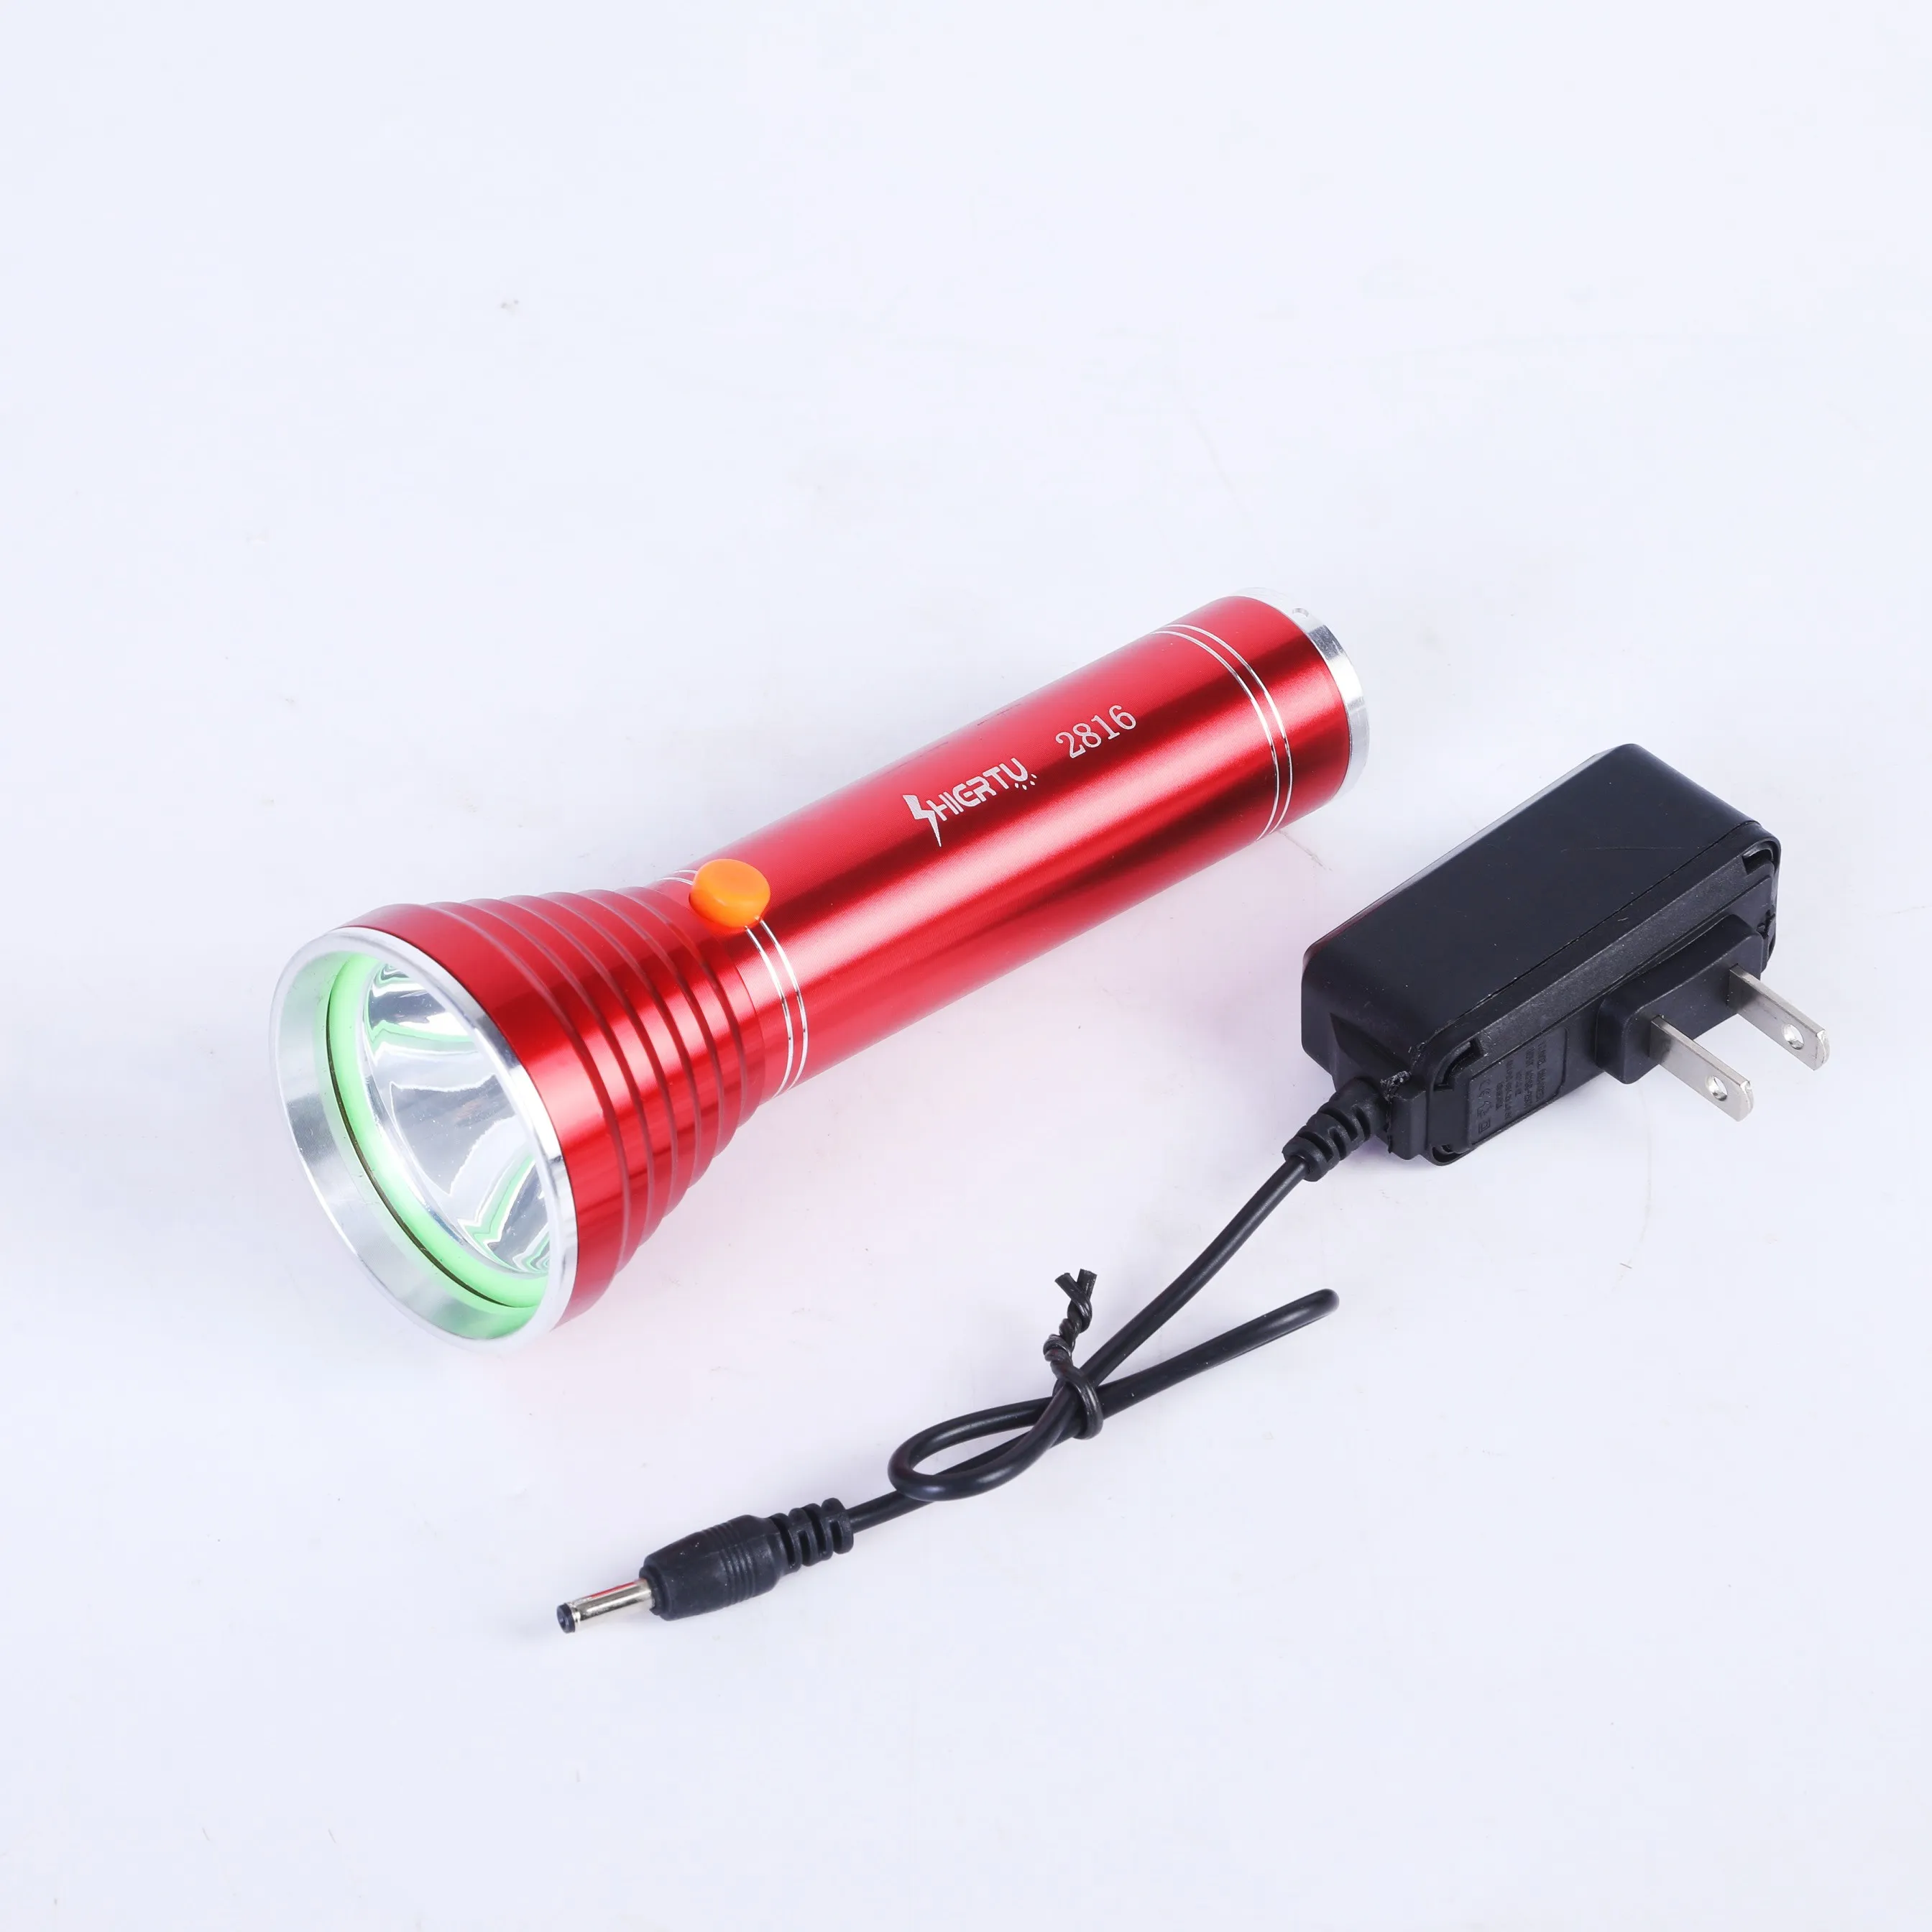 New design LED Flashlight Hidden Plug charging Rechargeable Outdoor use Torch